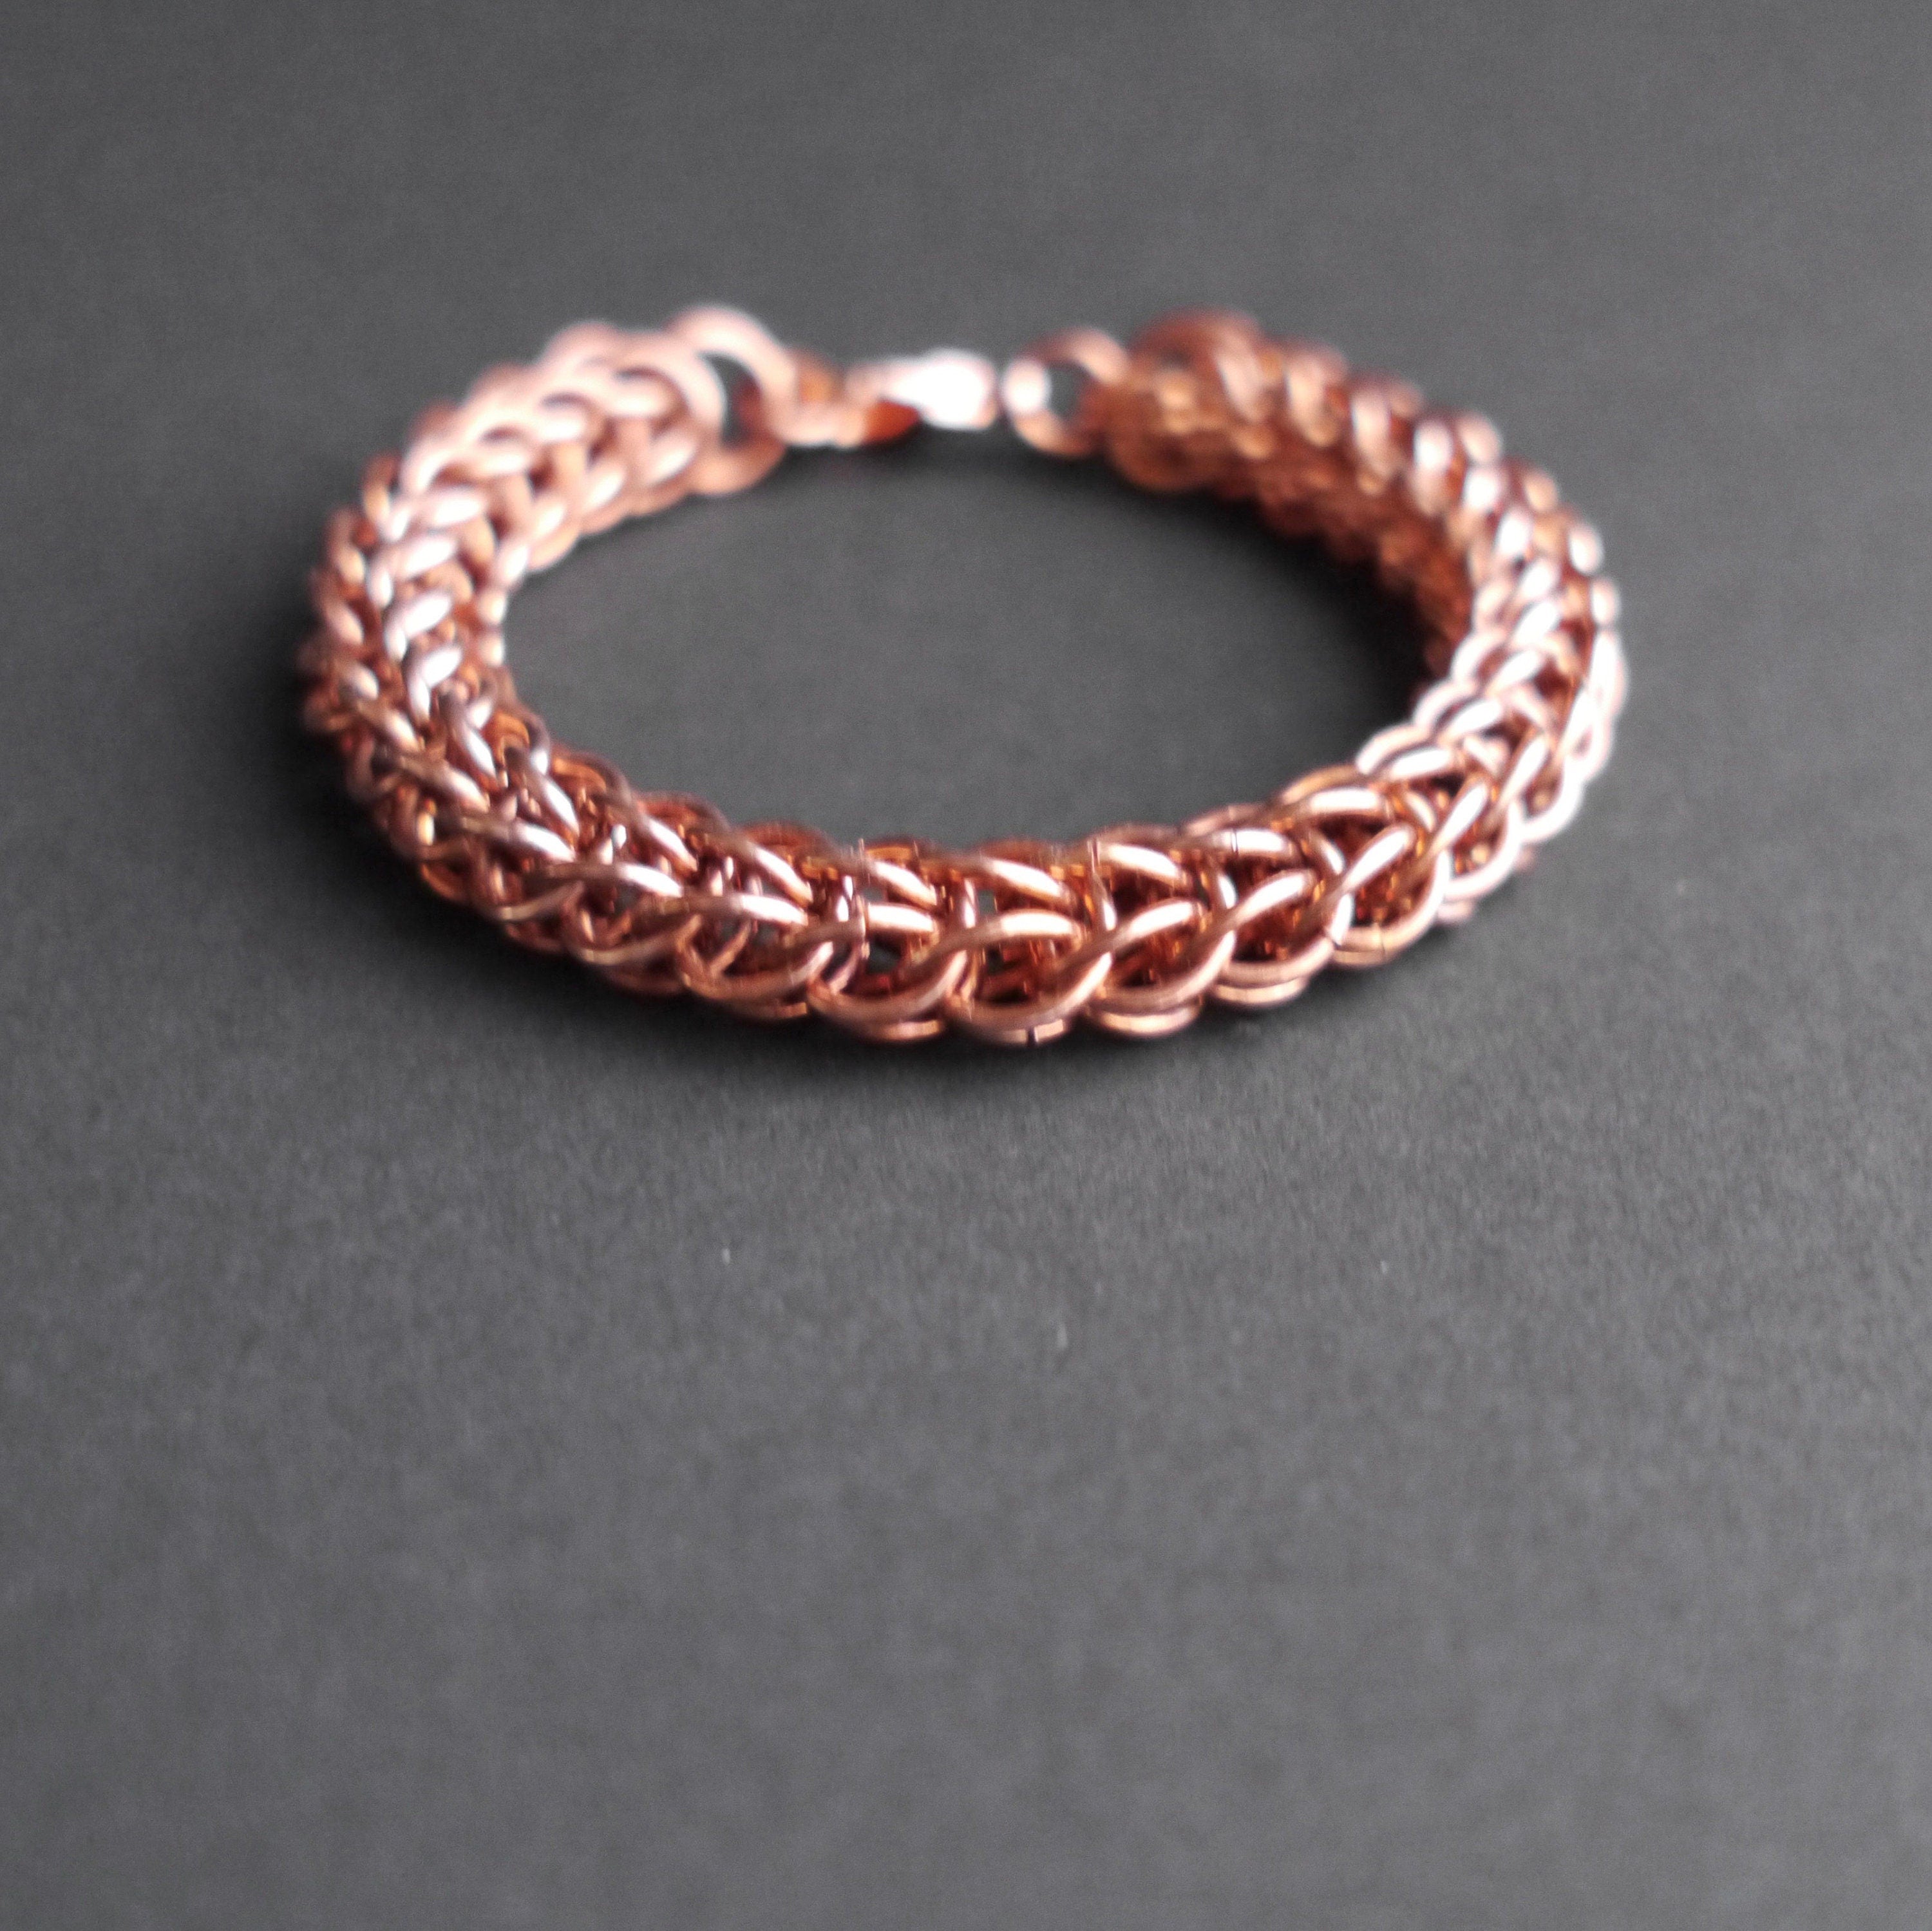 Pure Copper Men Wide Cuff Bracelet, Handmade Braided Twisted Hammered  Wrapped Copper Wire Wristband, Made to Order in Any Size - Etsy